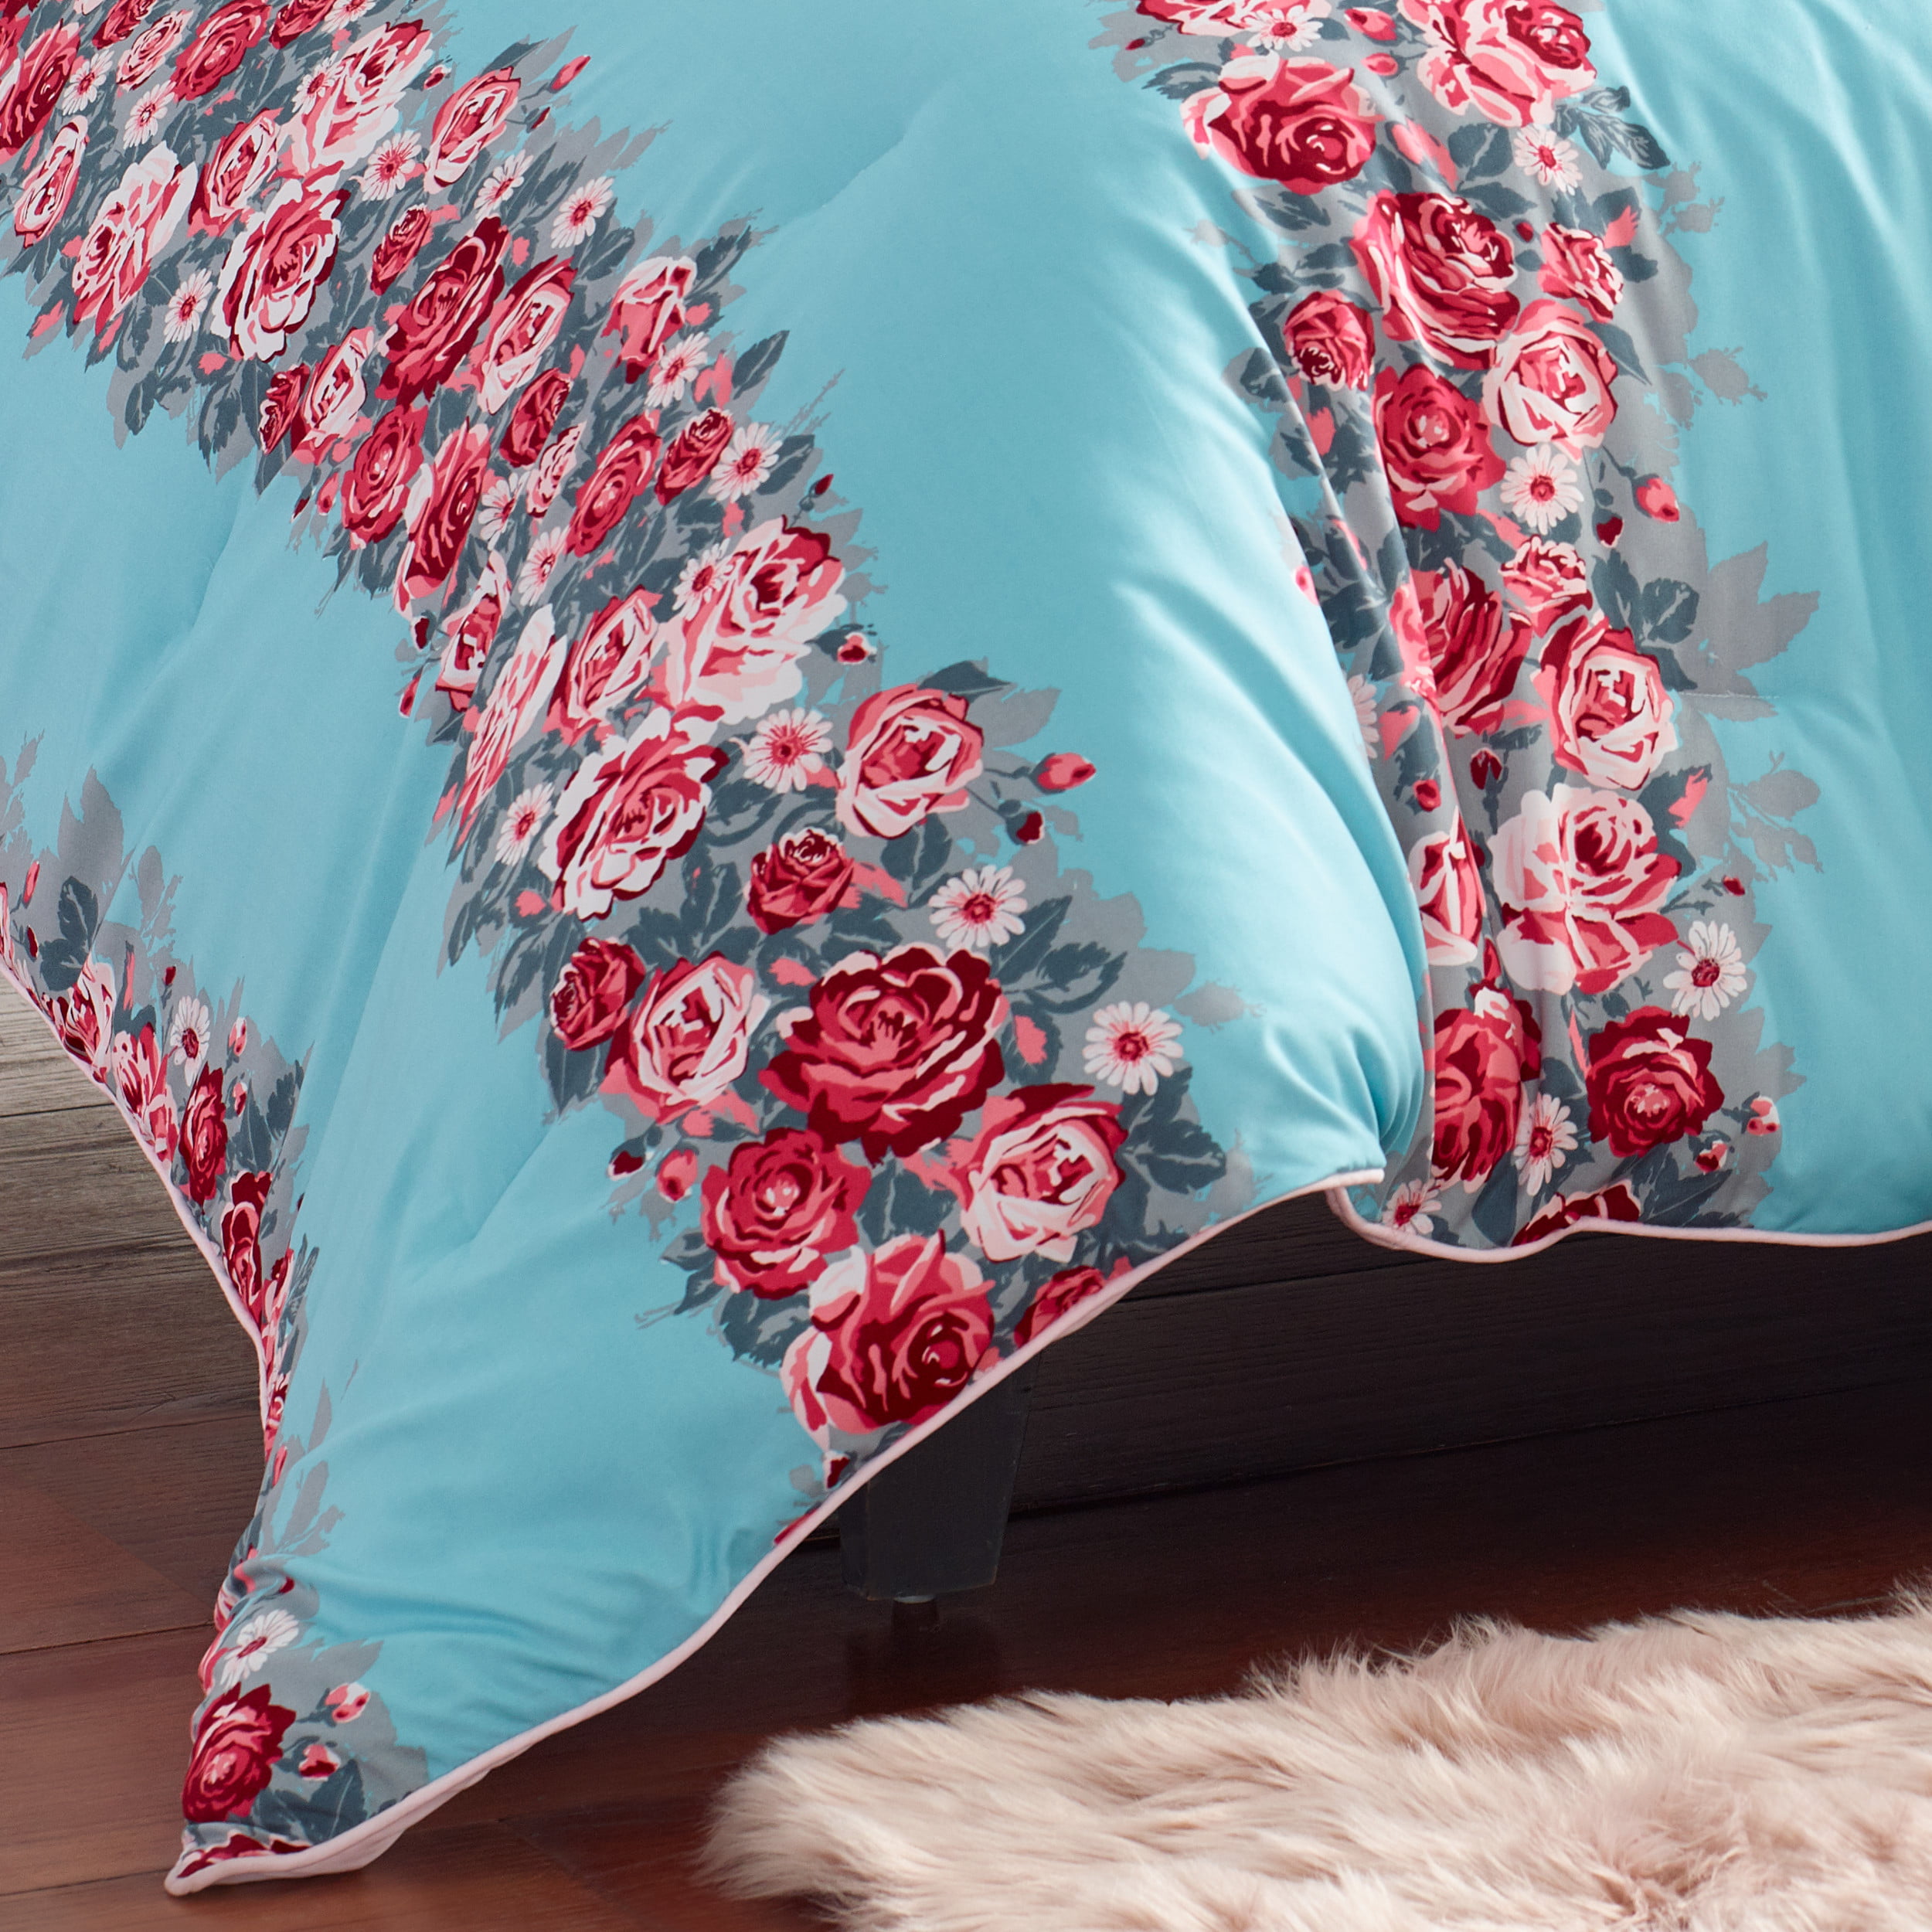 select size Betsey Johnson 6-piece Comforter Set Banded Floral